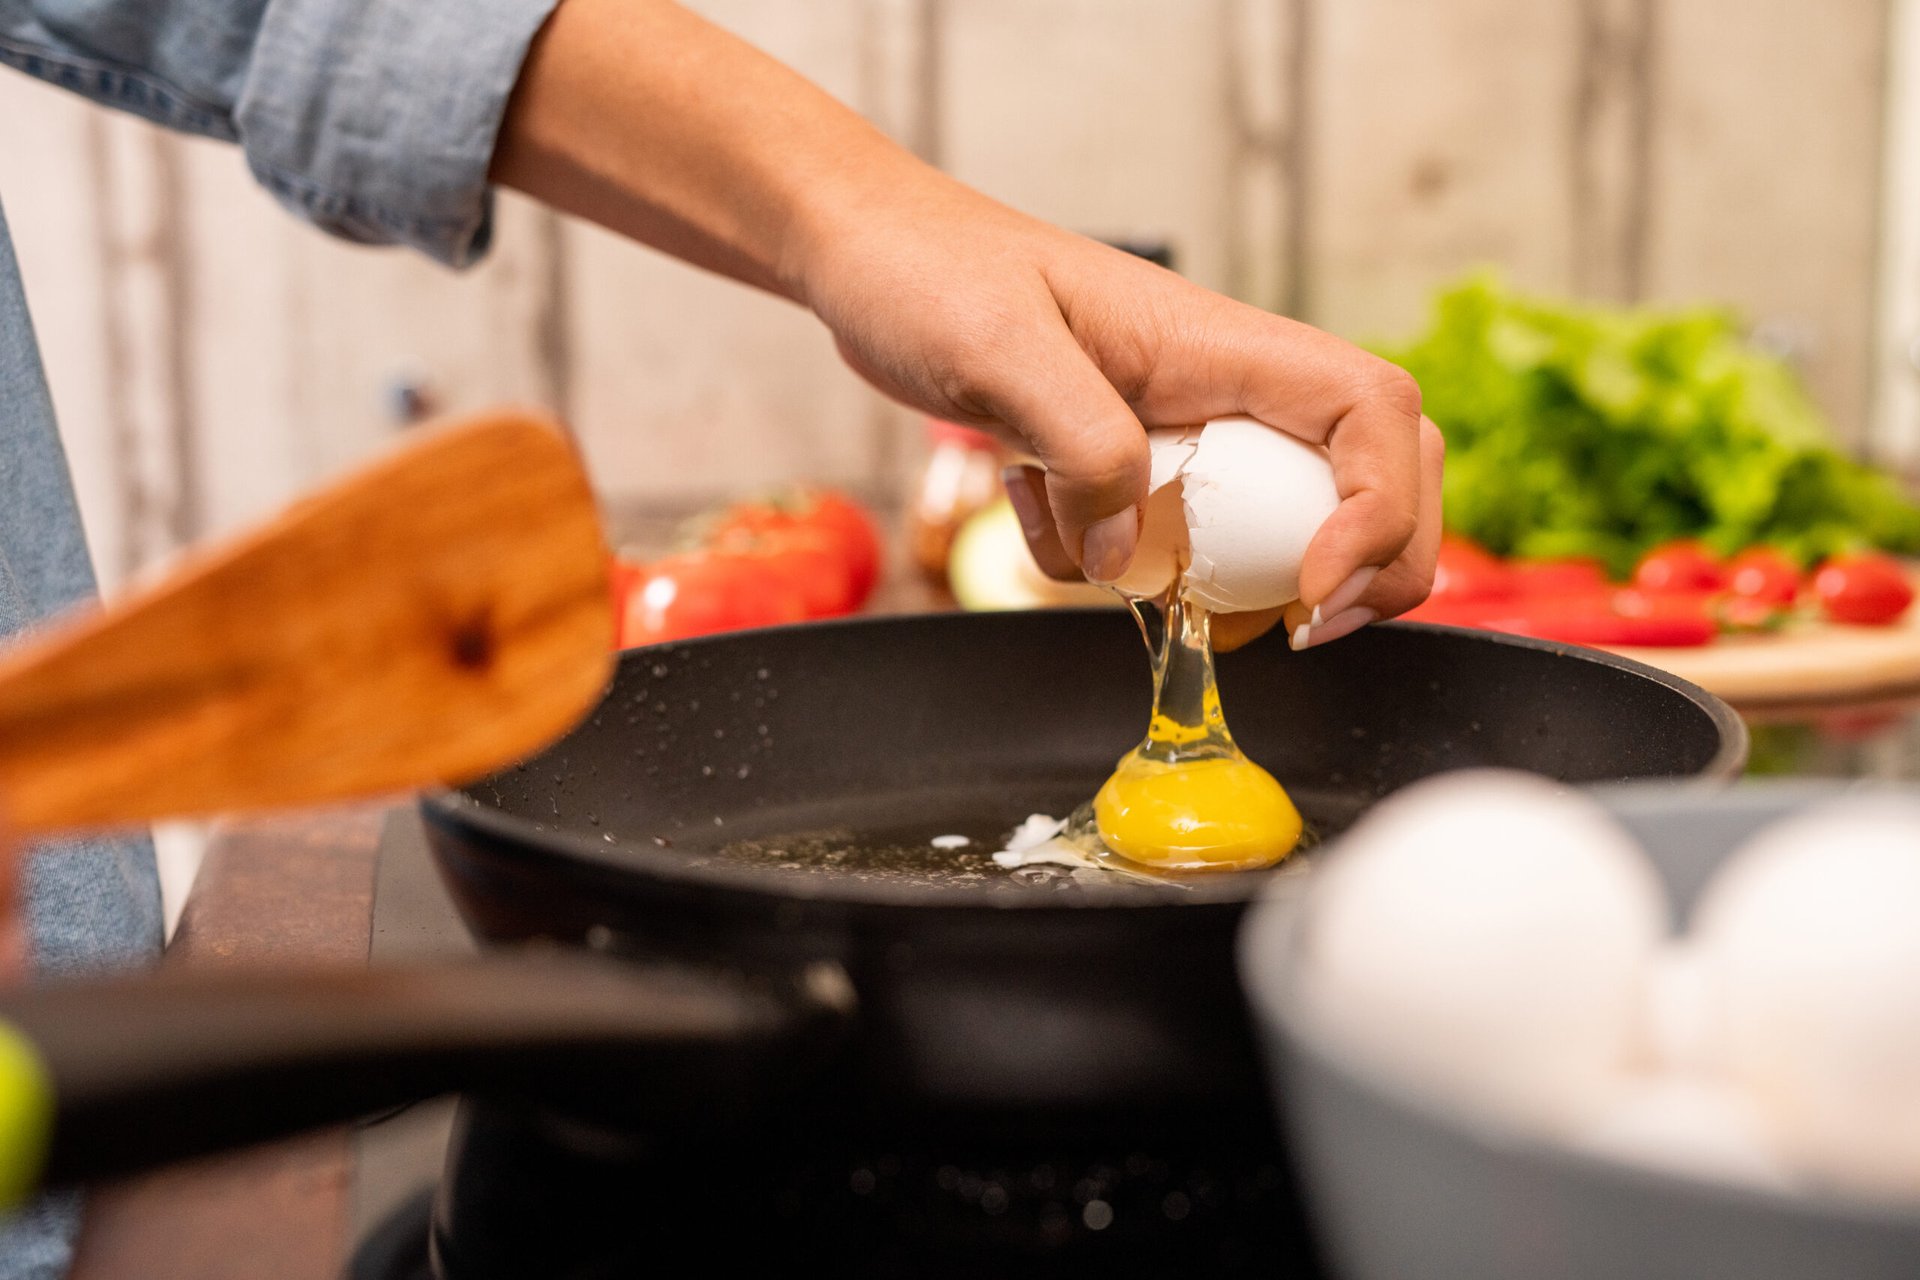 Cracking an egg into the frying pan in the kitchen cooking a meal